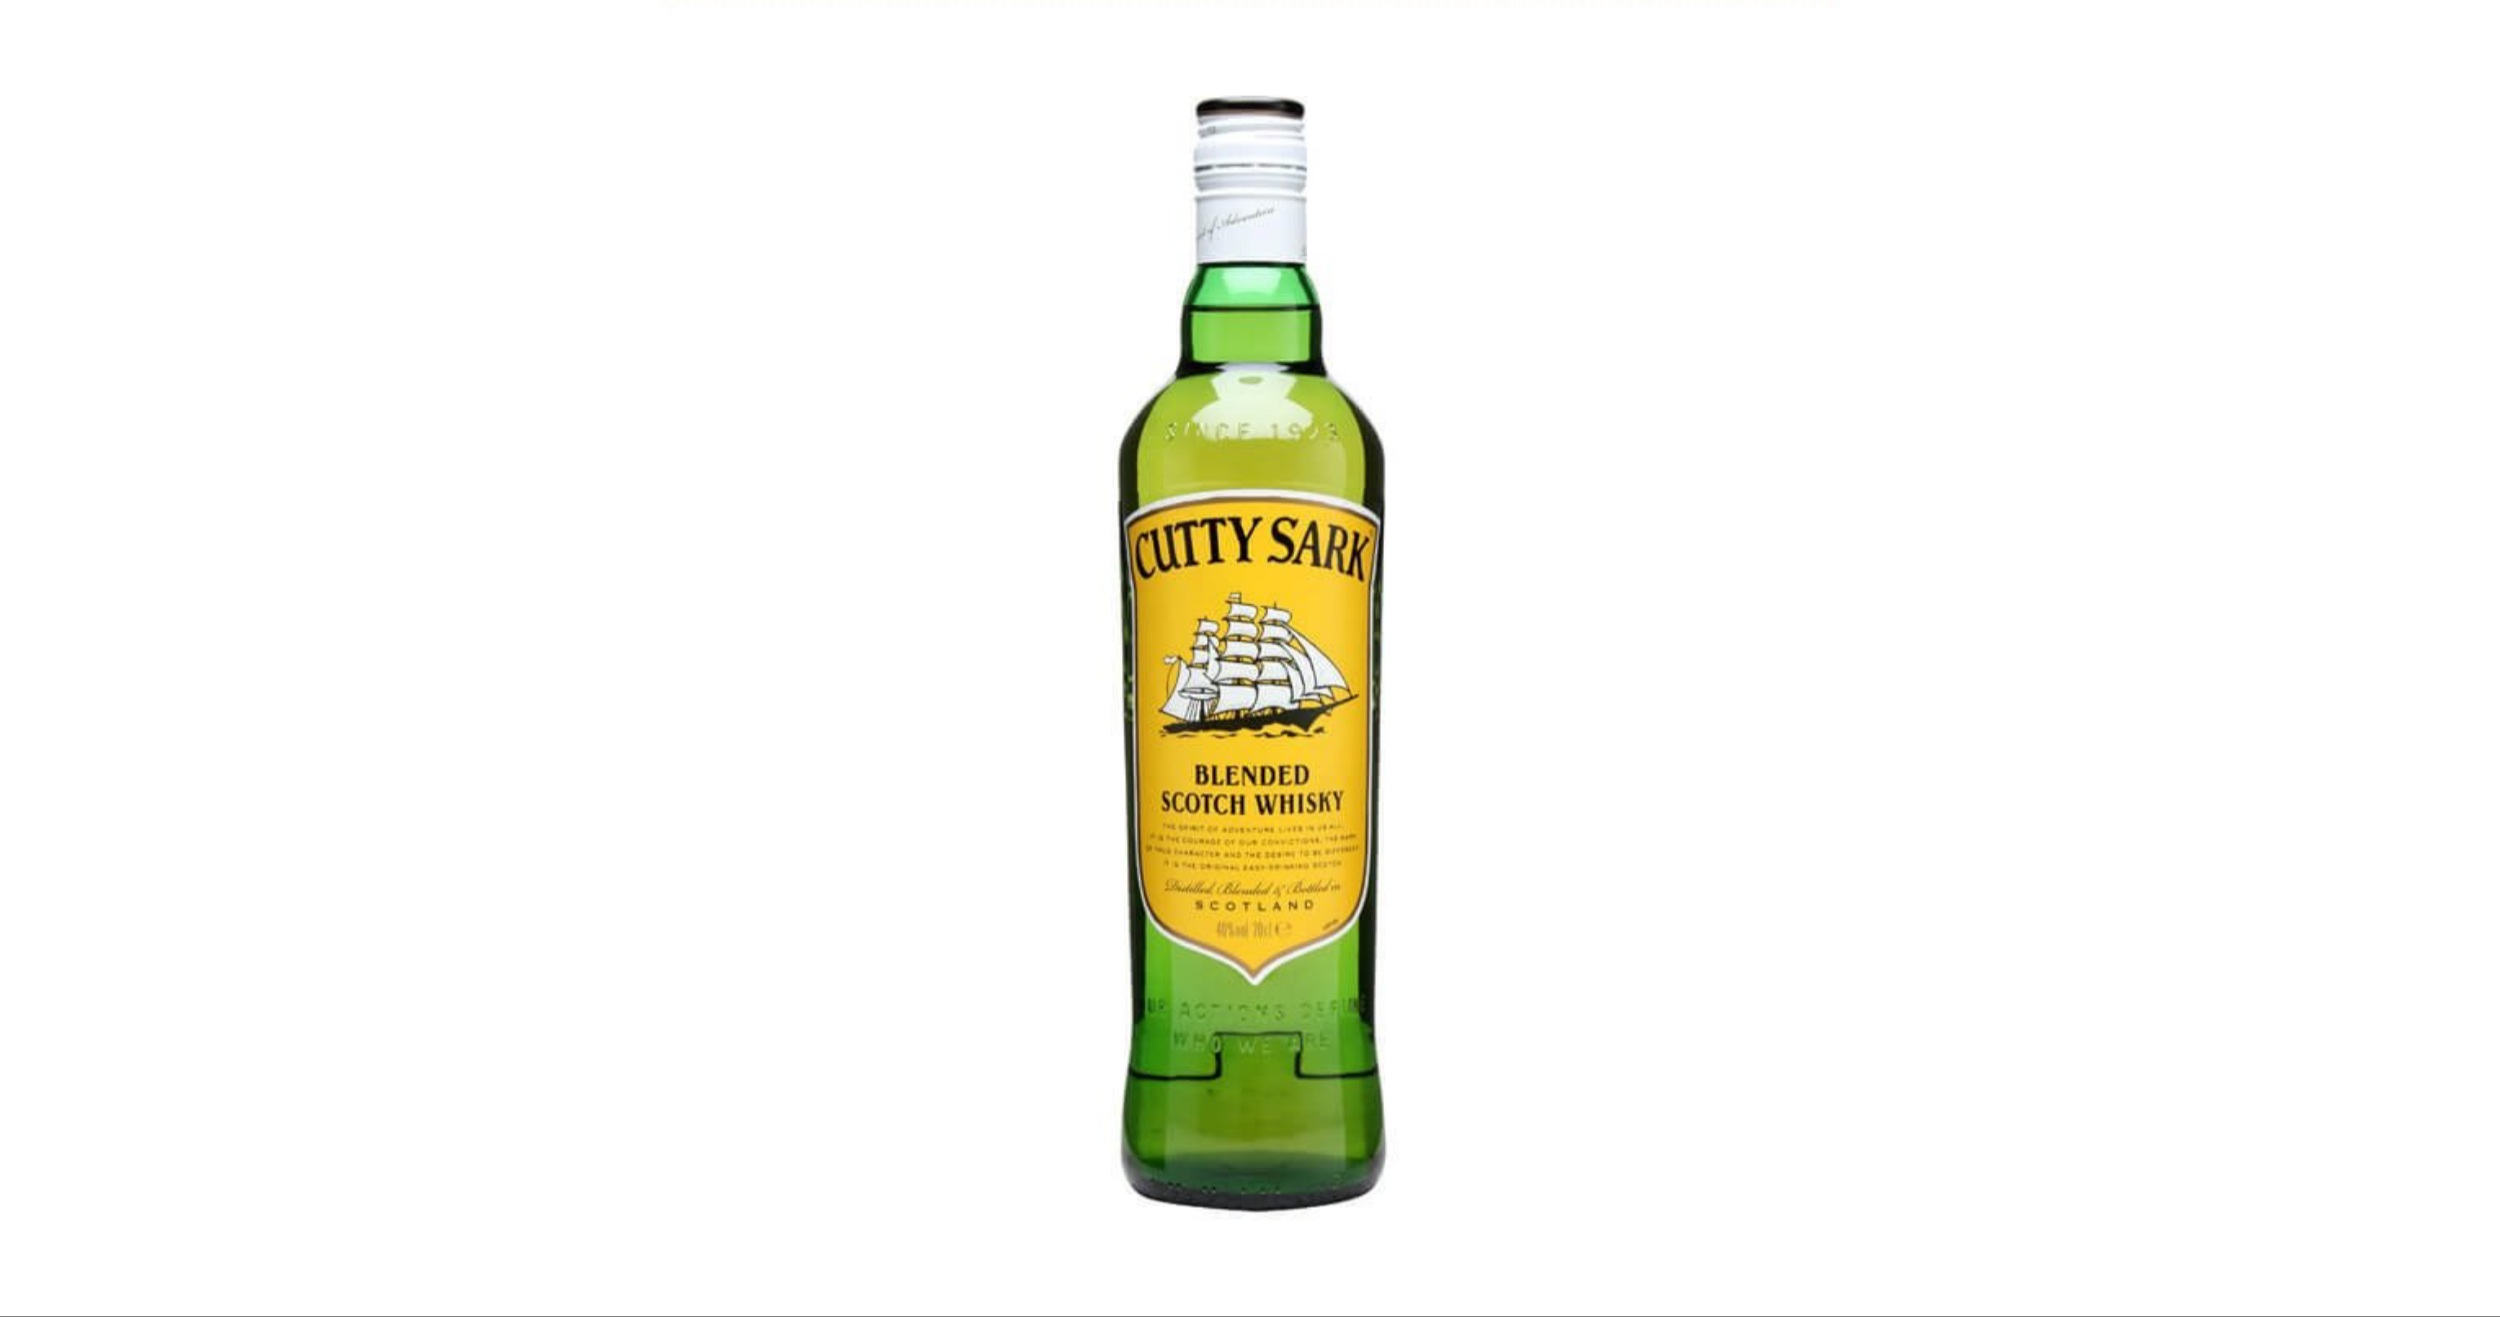 Cutty Sark 1 litre imported bottle has entered the capital of India with the same taste and flavour from Scotland